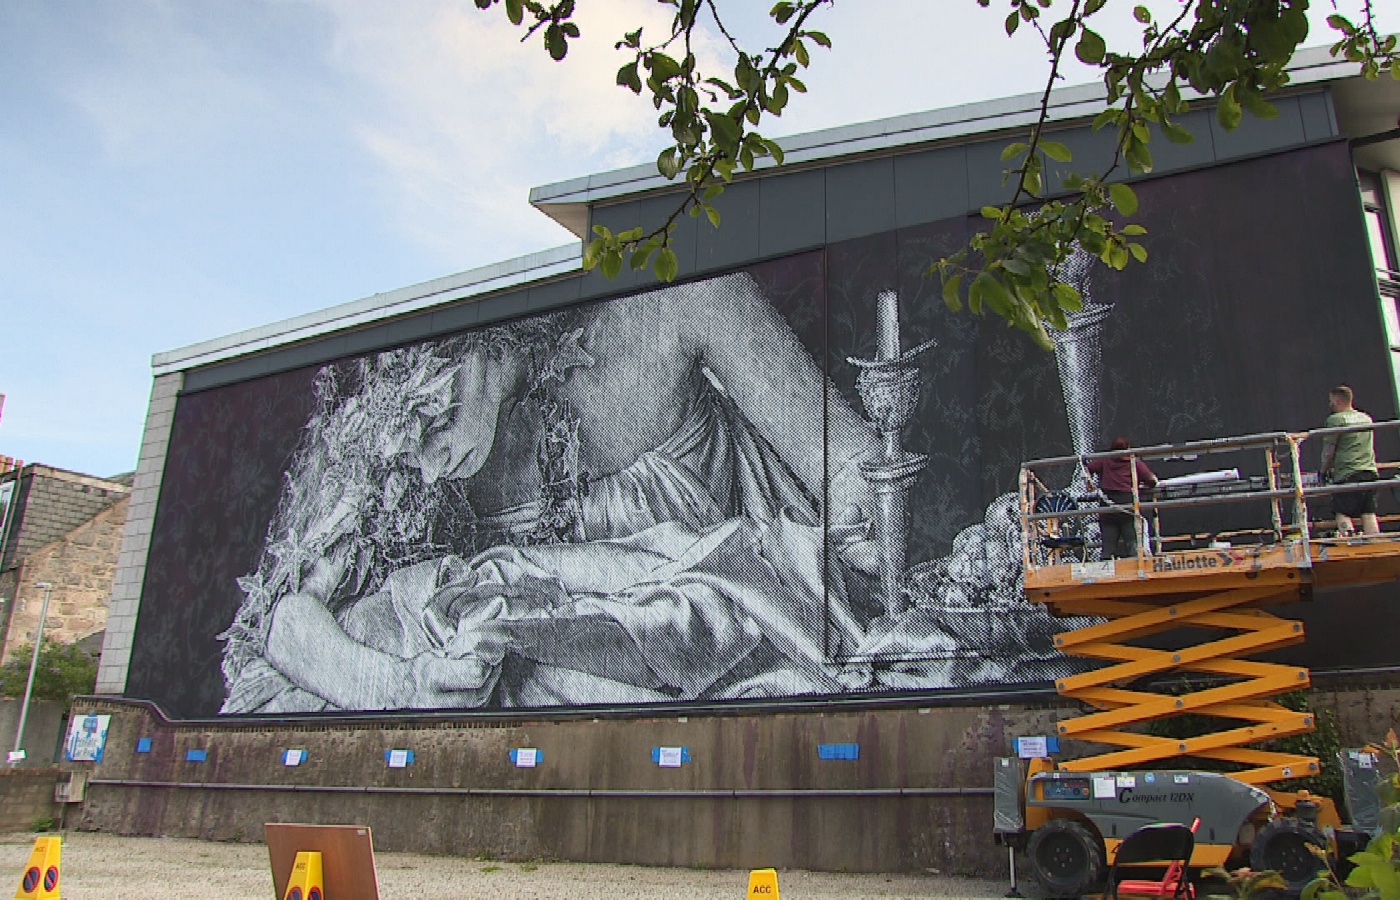 This year 13 artists are transforming some of the city's grey walls into eye-catching art.